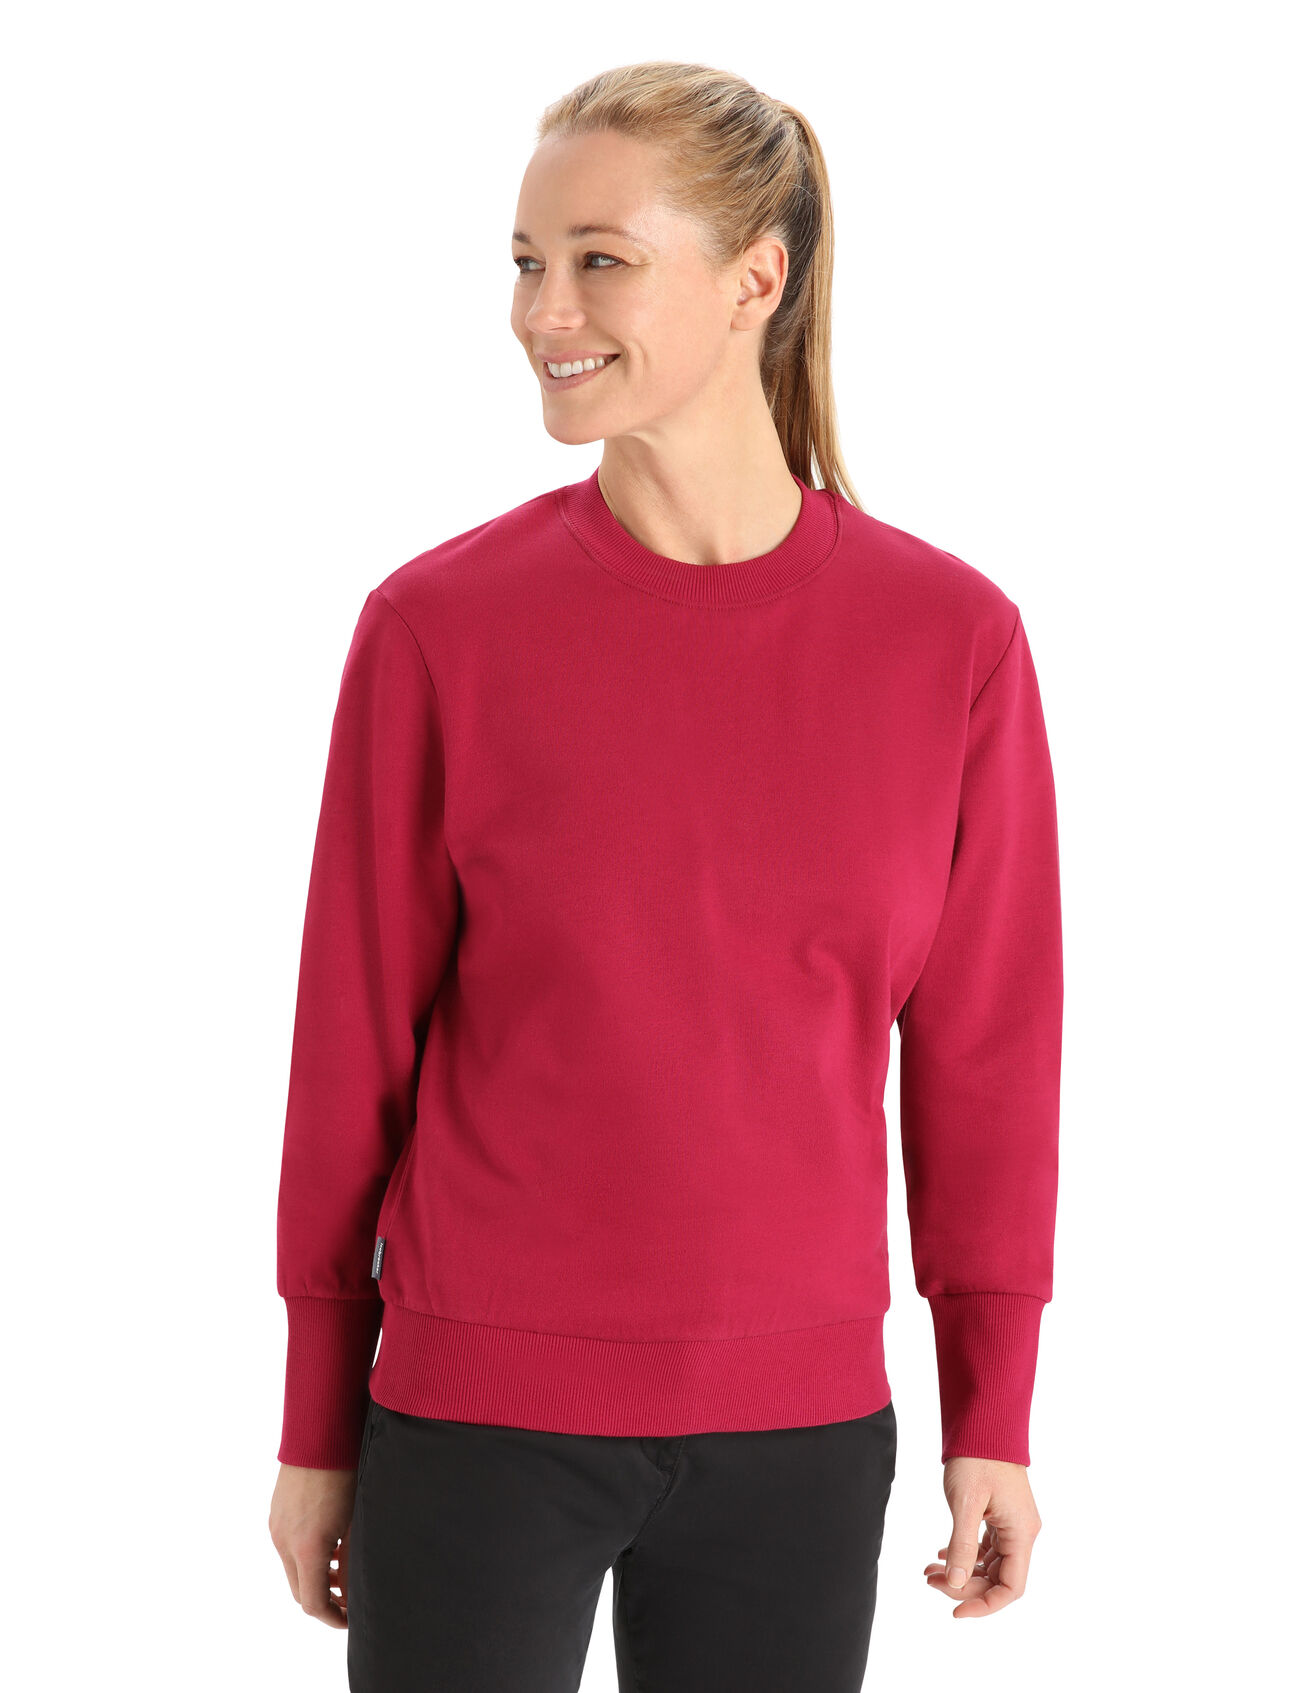 Womens Merino Cotton Central II Long Sleeve Sweatshirt A versatile, everyday pullover that goes anywhere in comfort, the Central II Long Sleeve Sweatshirt features a sustainable blend of natural merino wool and soft organically grown cotton.